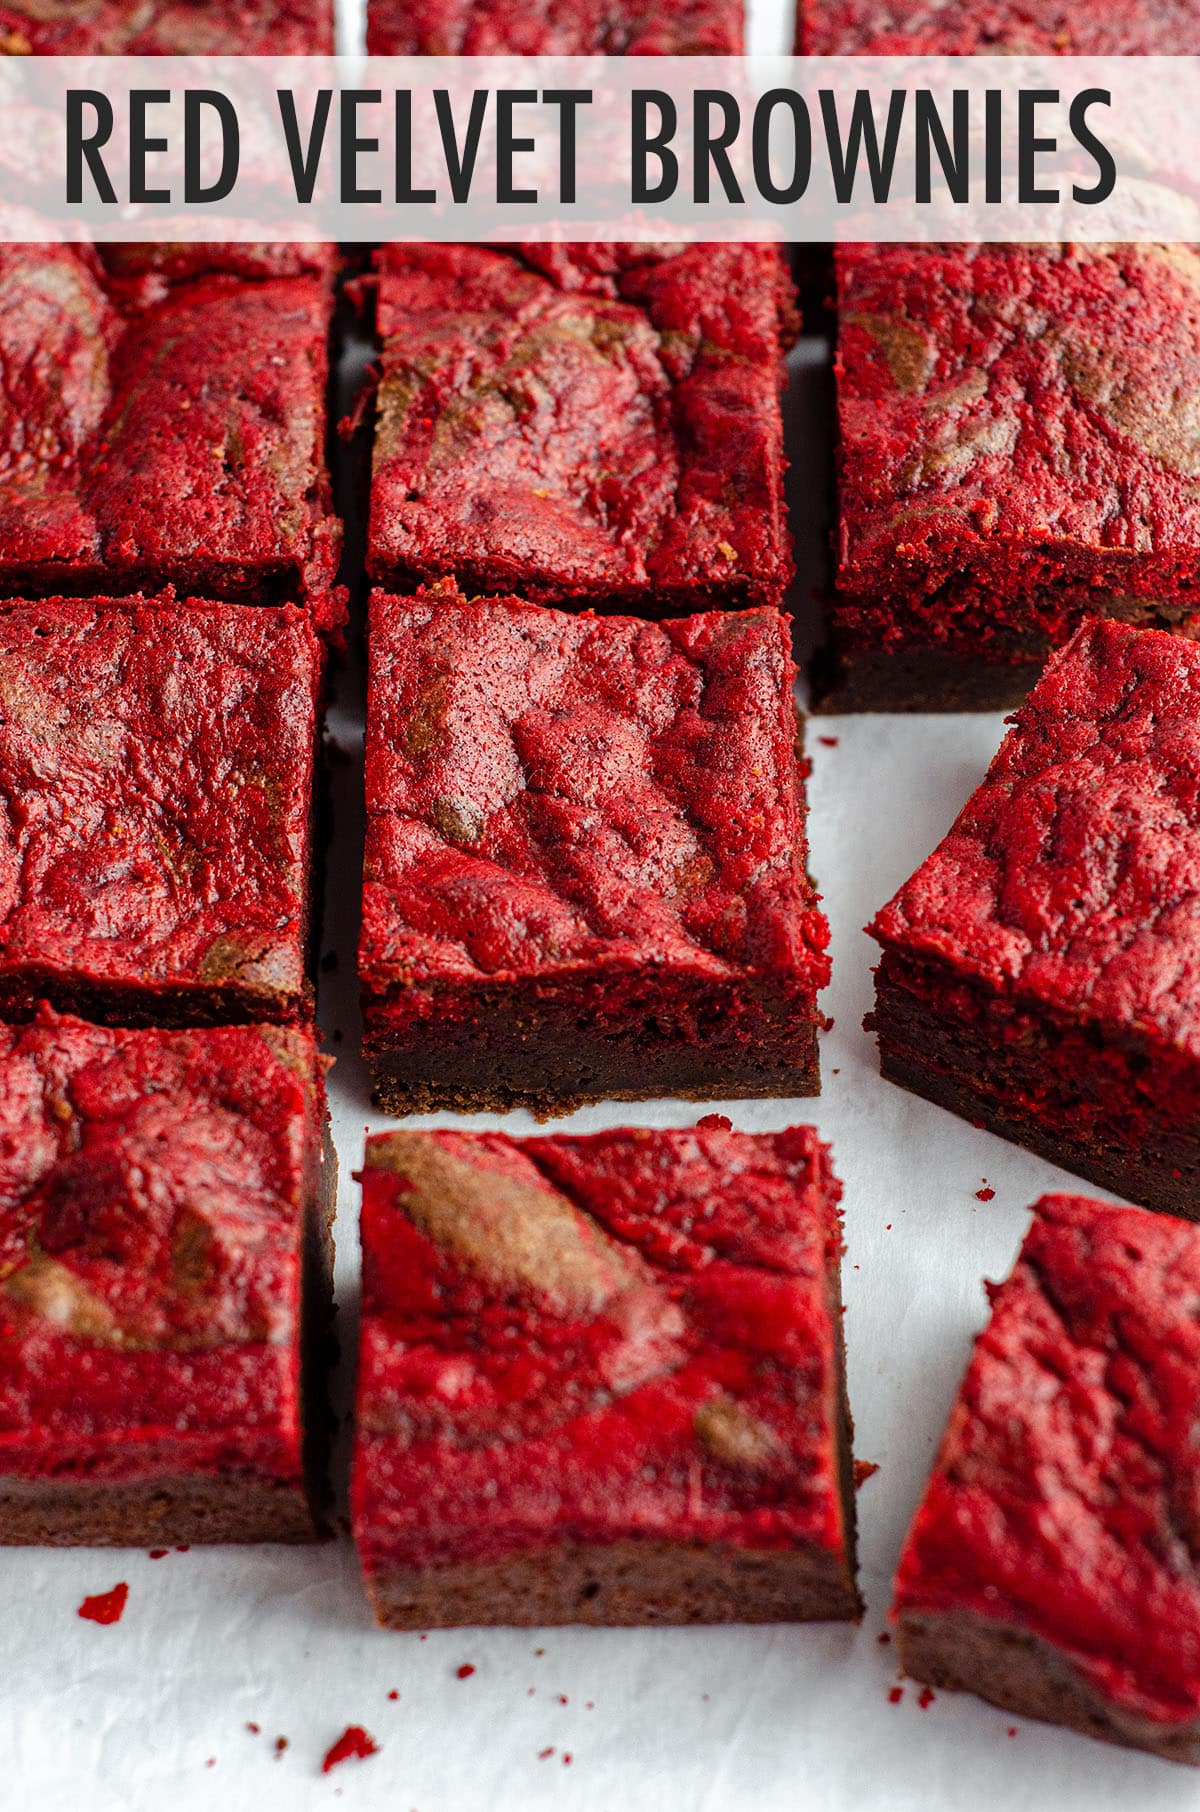 Dense and fudgy brownies swirled with red velvet cake-- everything is made from scratch! via @frshaprilflours